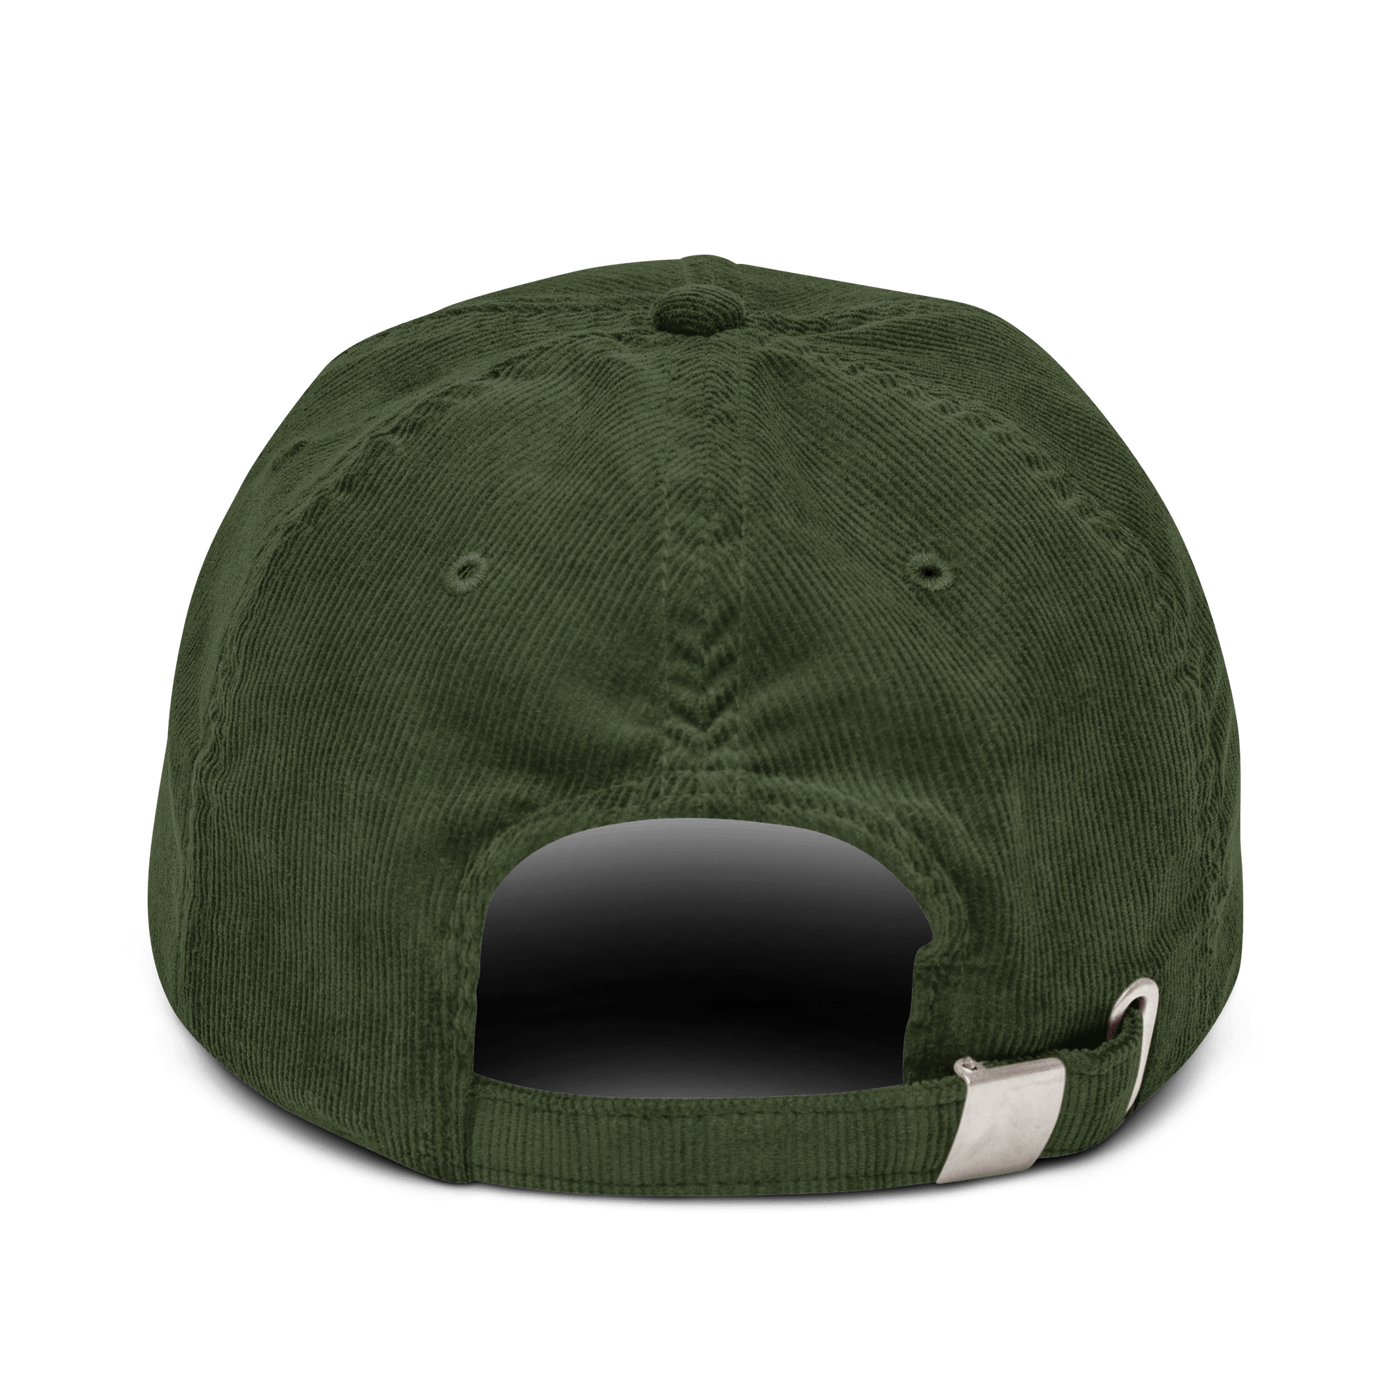 I survived a pandemic Corduroy hat - Dark Olive - - Just Another Cap Store